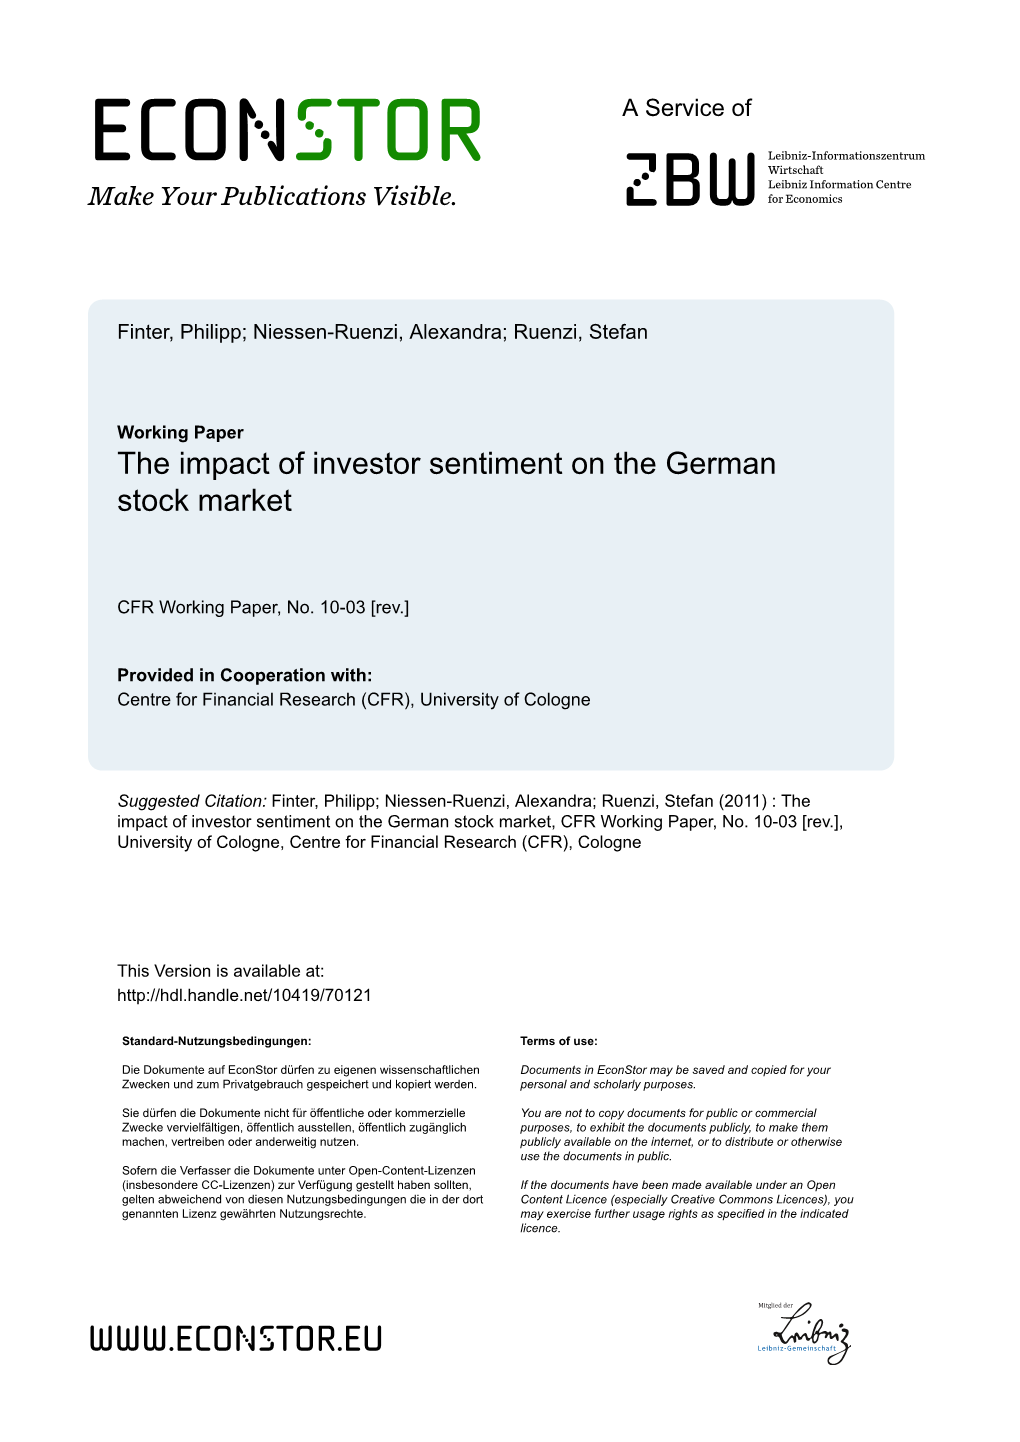 The Impact of Investor Sentiment on the German Stock Market